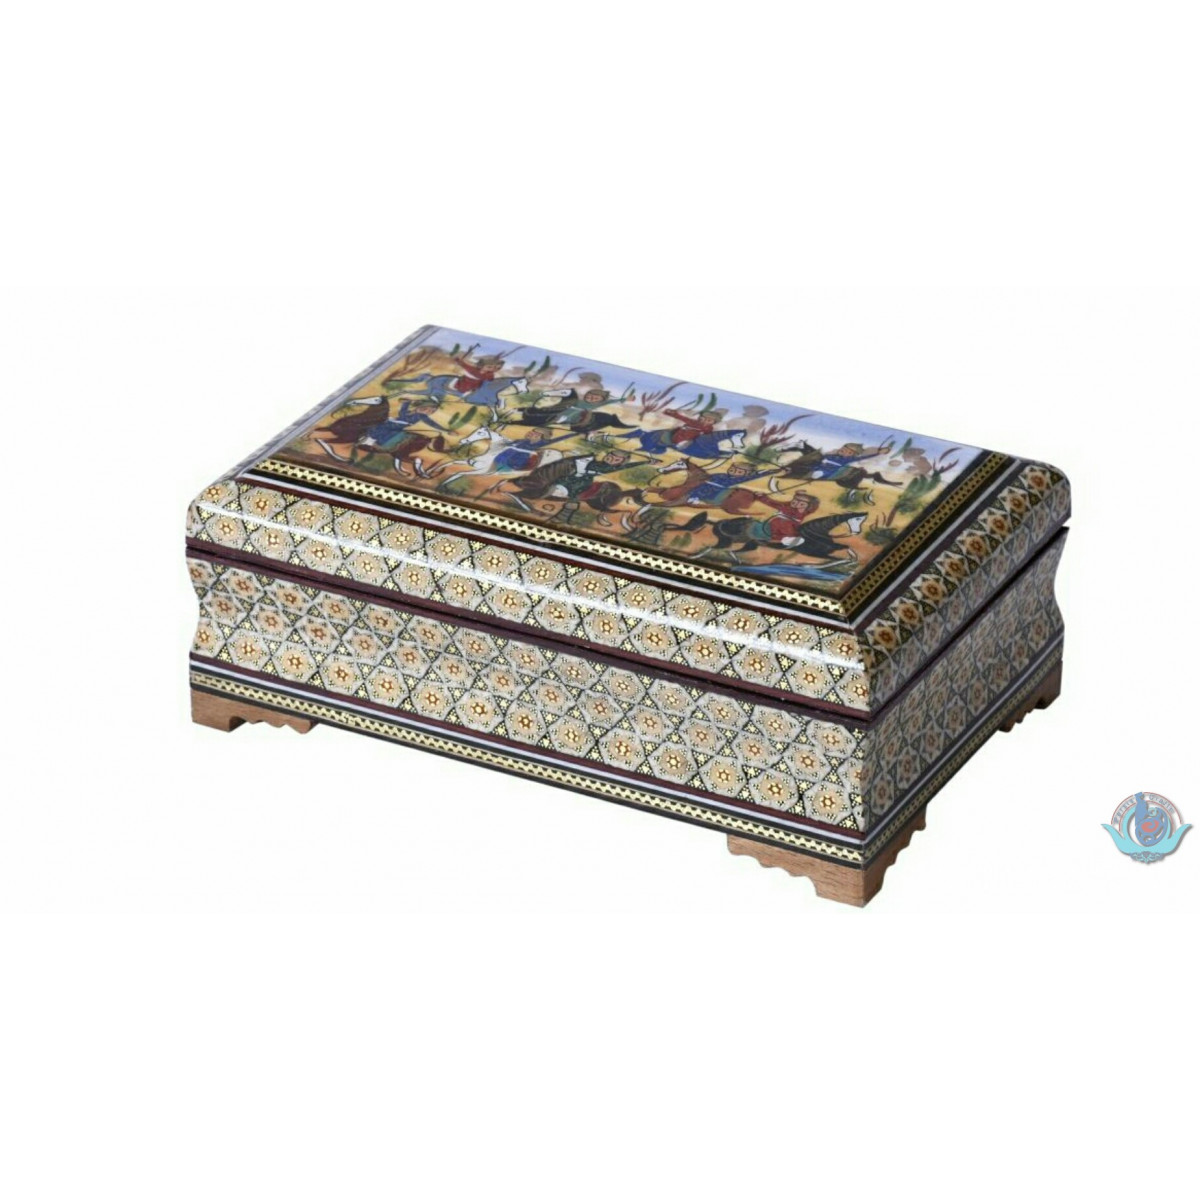 Khatam Wood Marquetry Jewelry Box with Miniature - PKH1059-Persian Handicrafts